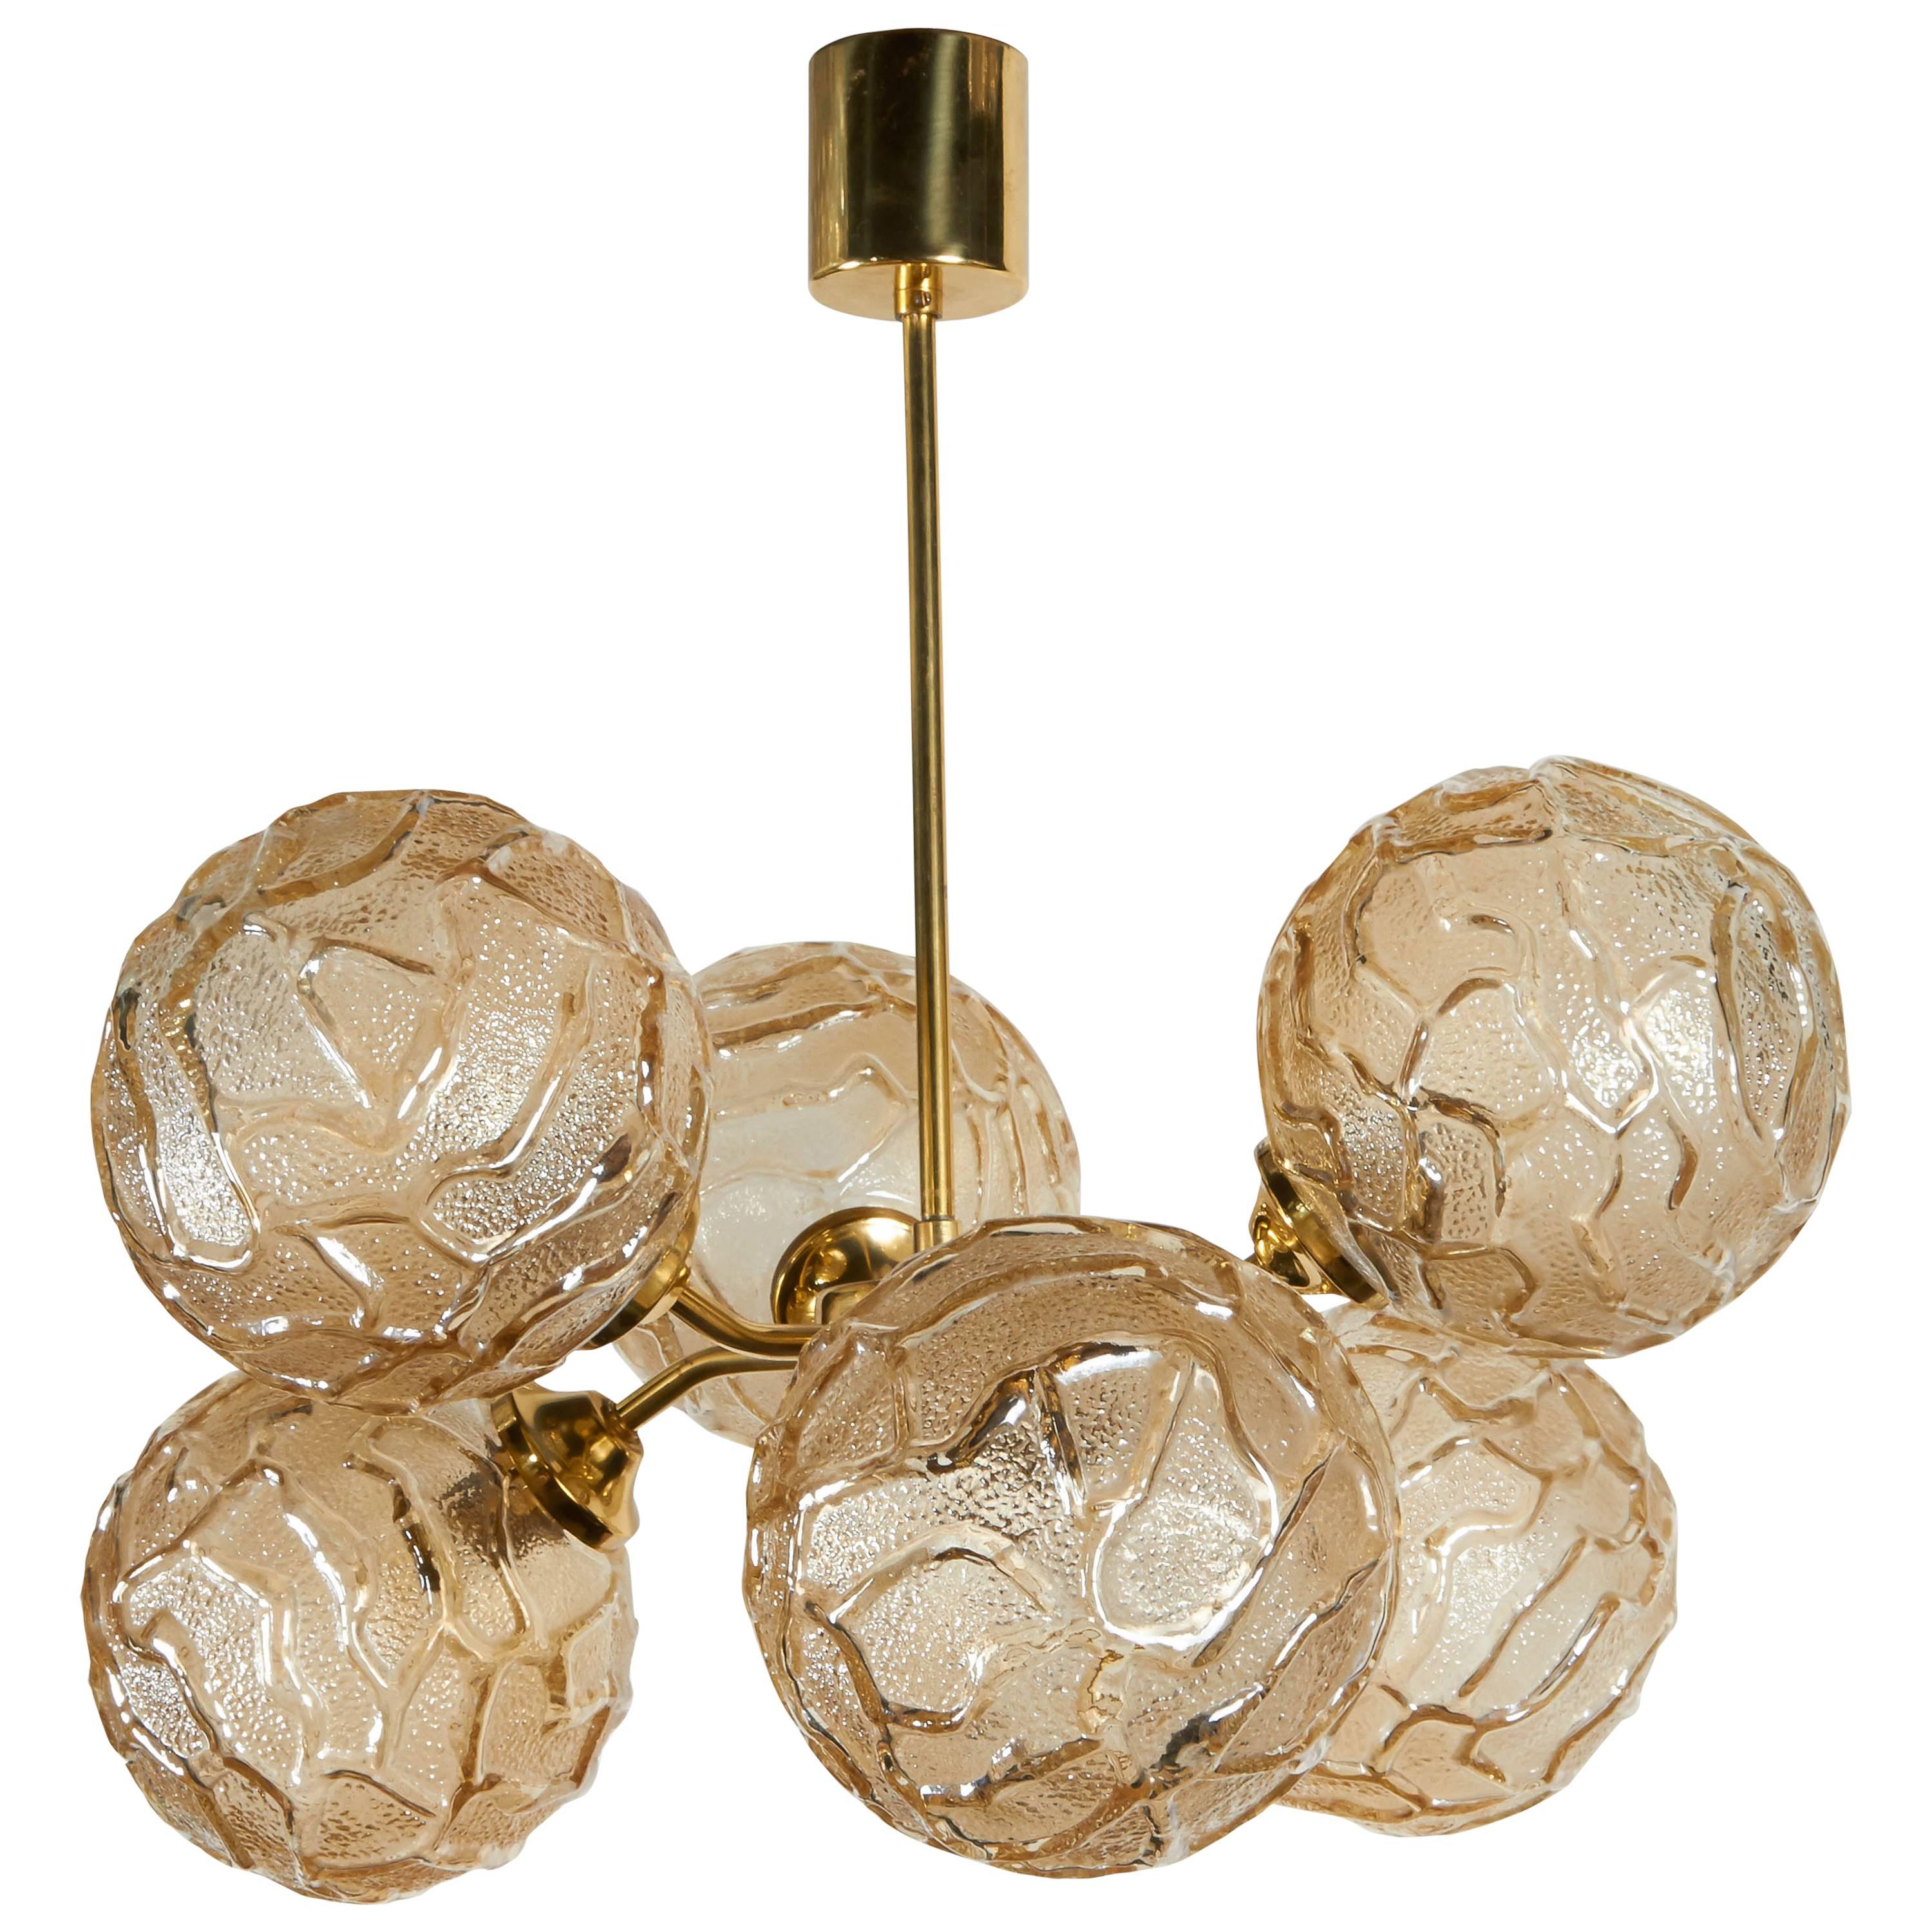 Mid-Century Modern Sputnik globe chandelier. The fixture has brass atomic frame with an elegant stem and cylinder canopy and features alternating arm design. Fitted with six textured art glass globes with geometric patterns in hues of champagne or